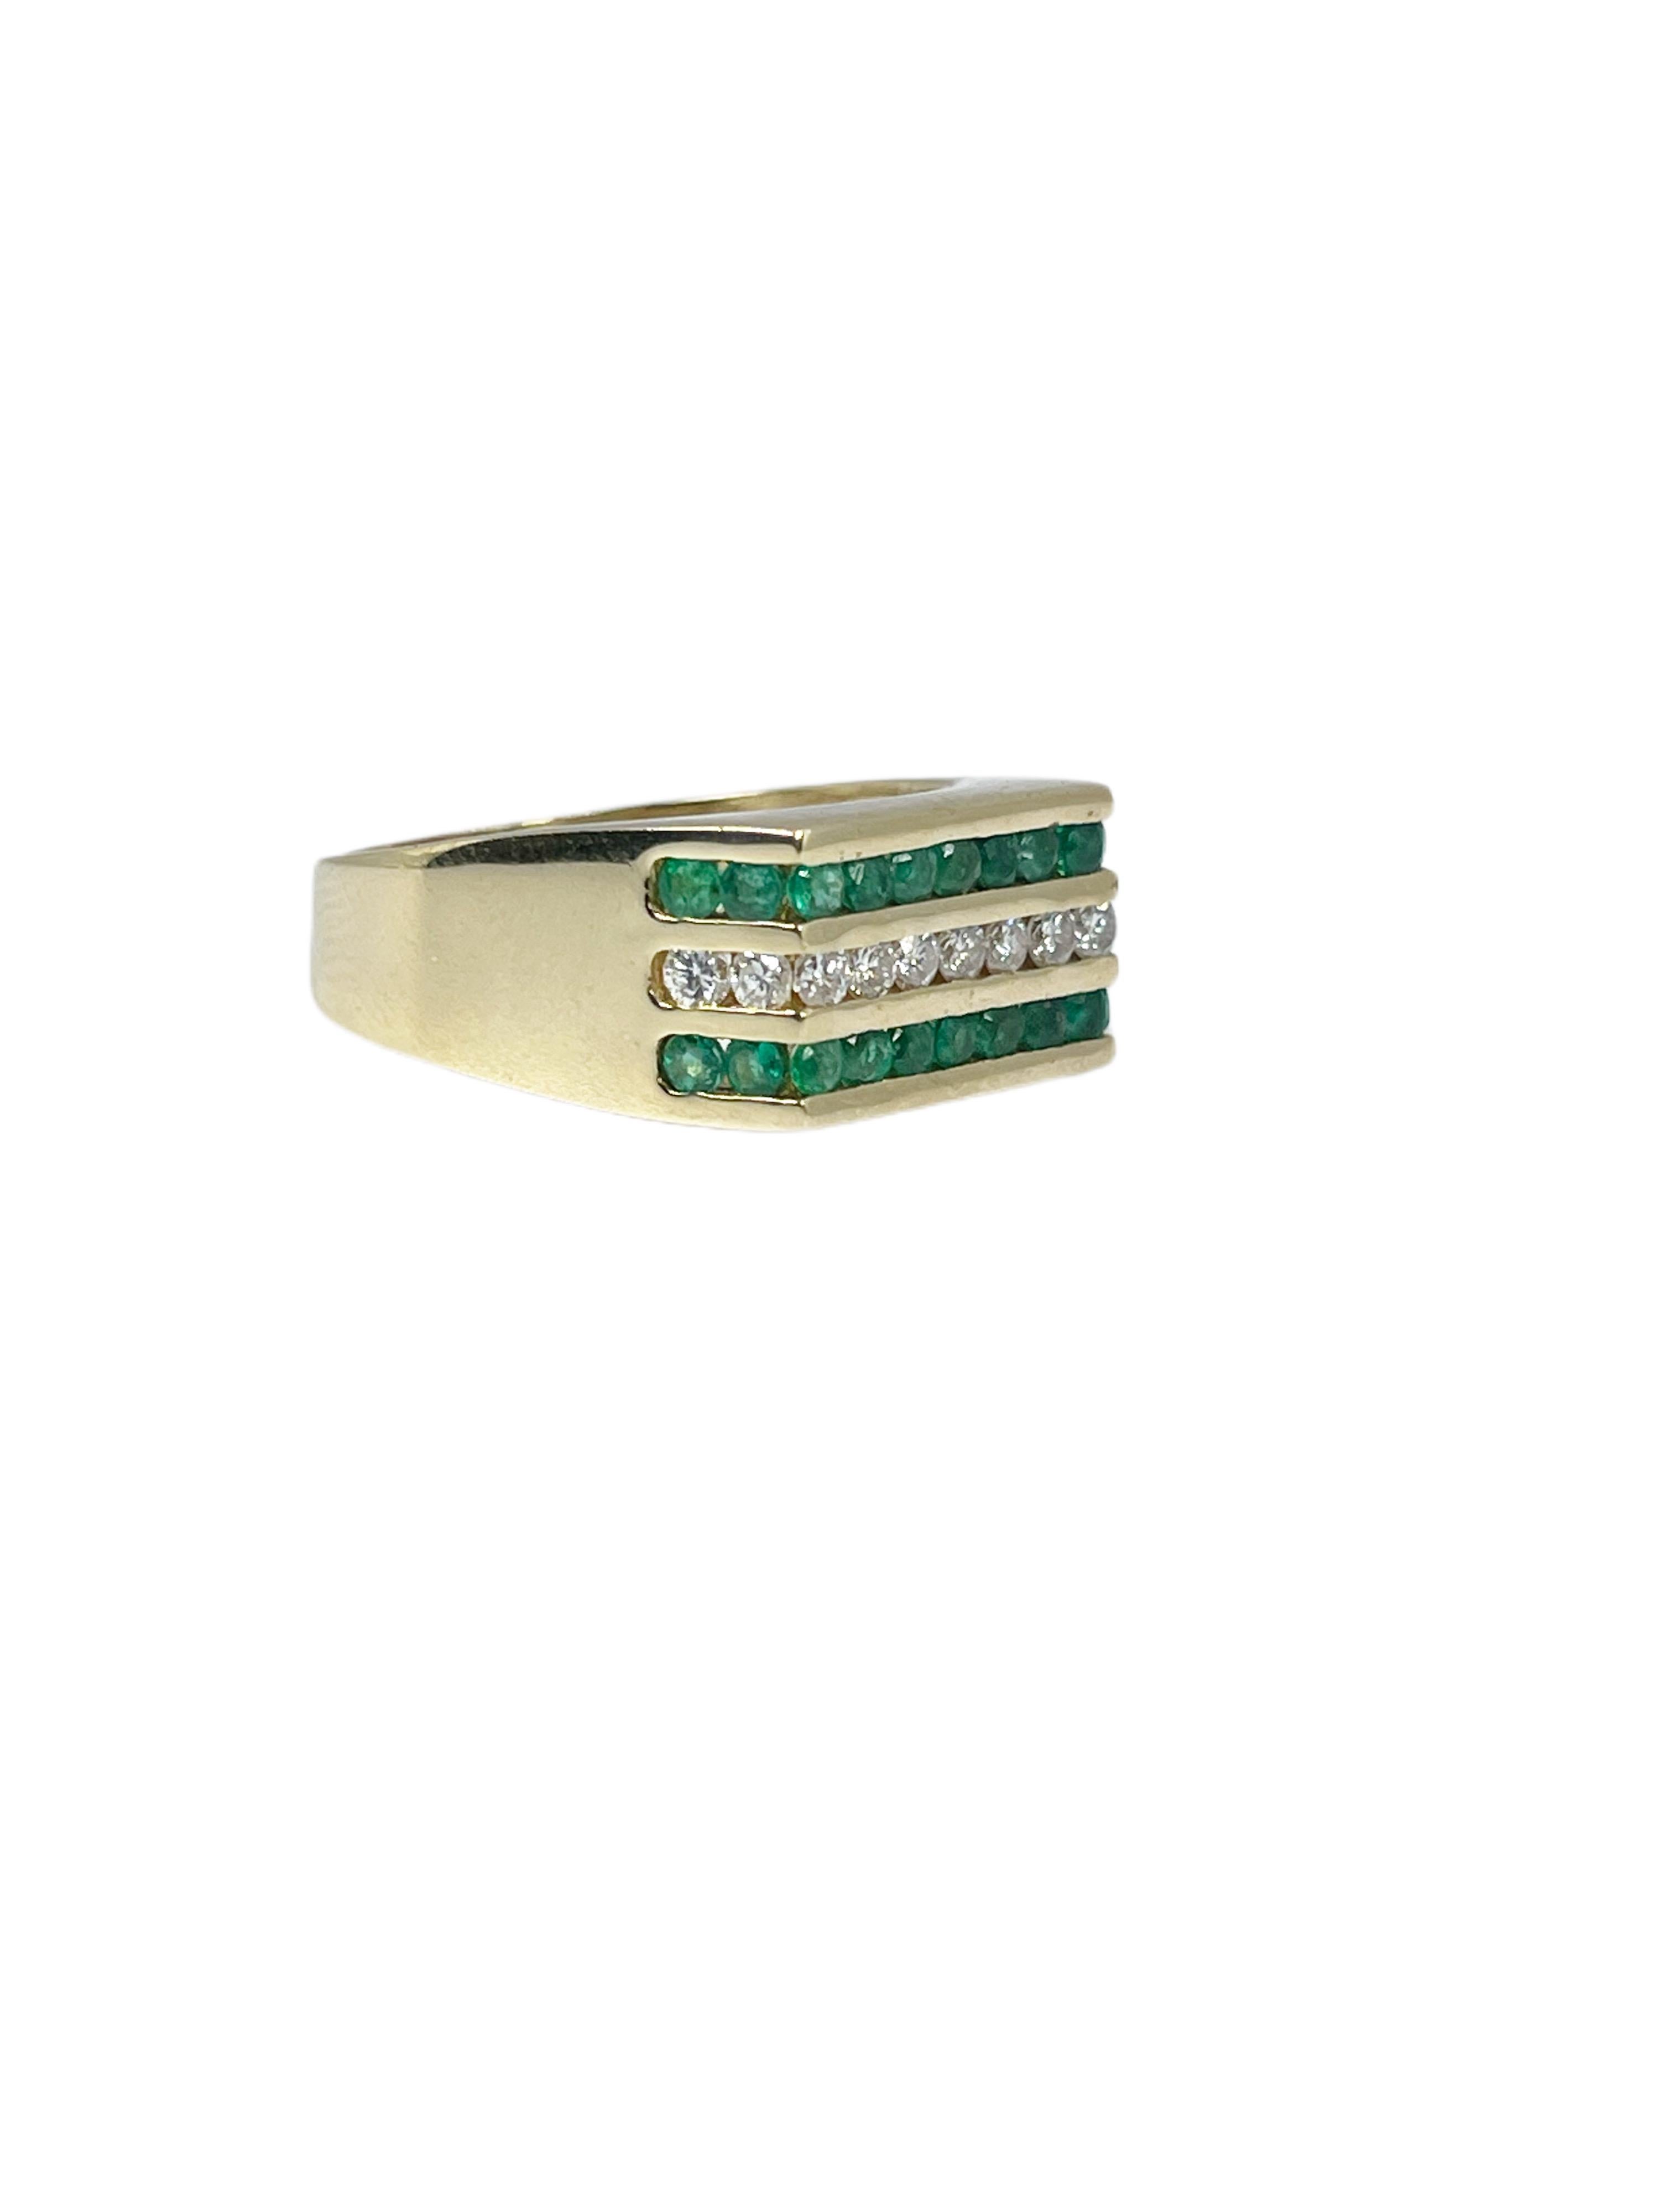 Mens ring made with natural emeralds and diamonds in 18KT yellow gold.

GRAM WEIGHT: 8.99gr
GOLD: 18KT yellow gold

NATURAL DIAMOND(S)
Cut: Round Brilliant
Color: G-H 
Clarity: SI (average)
Carat: 0.44ct

NATURAL EMERALD(S)
Cut: Round 
Color: